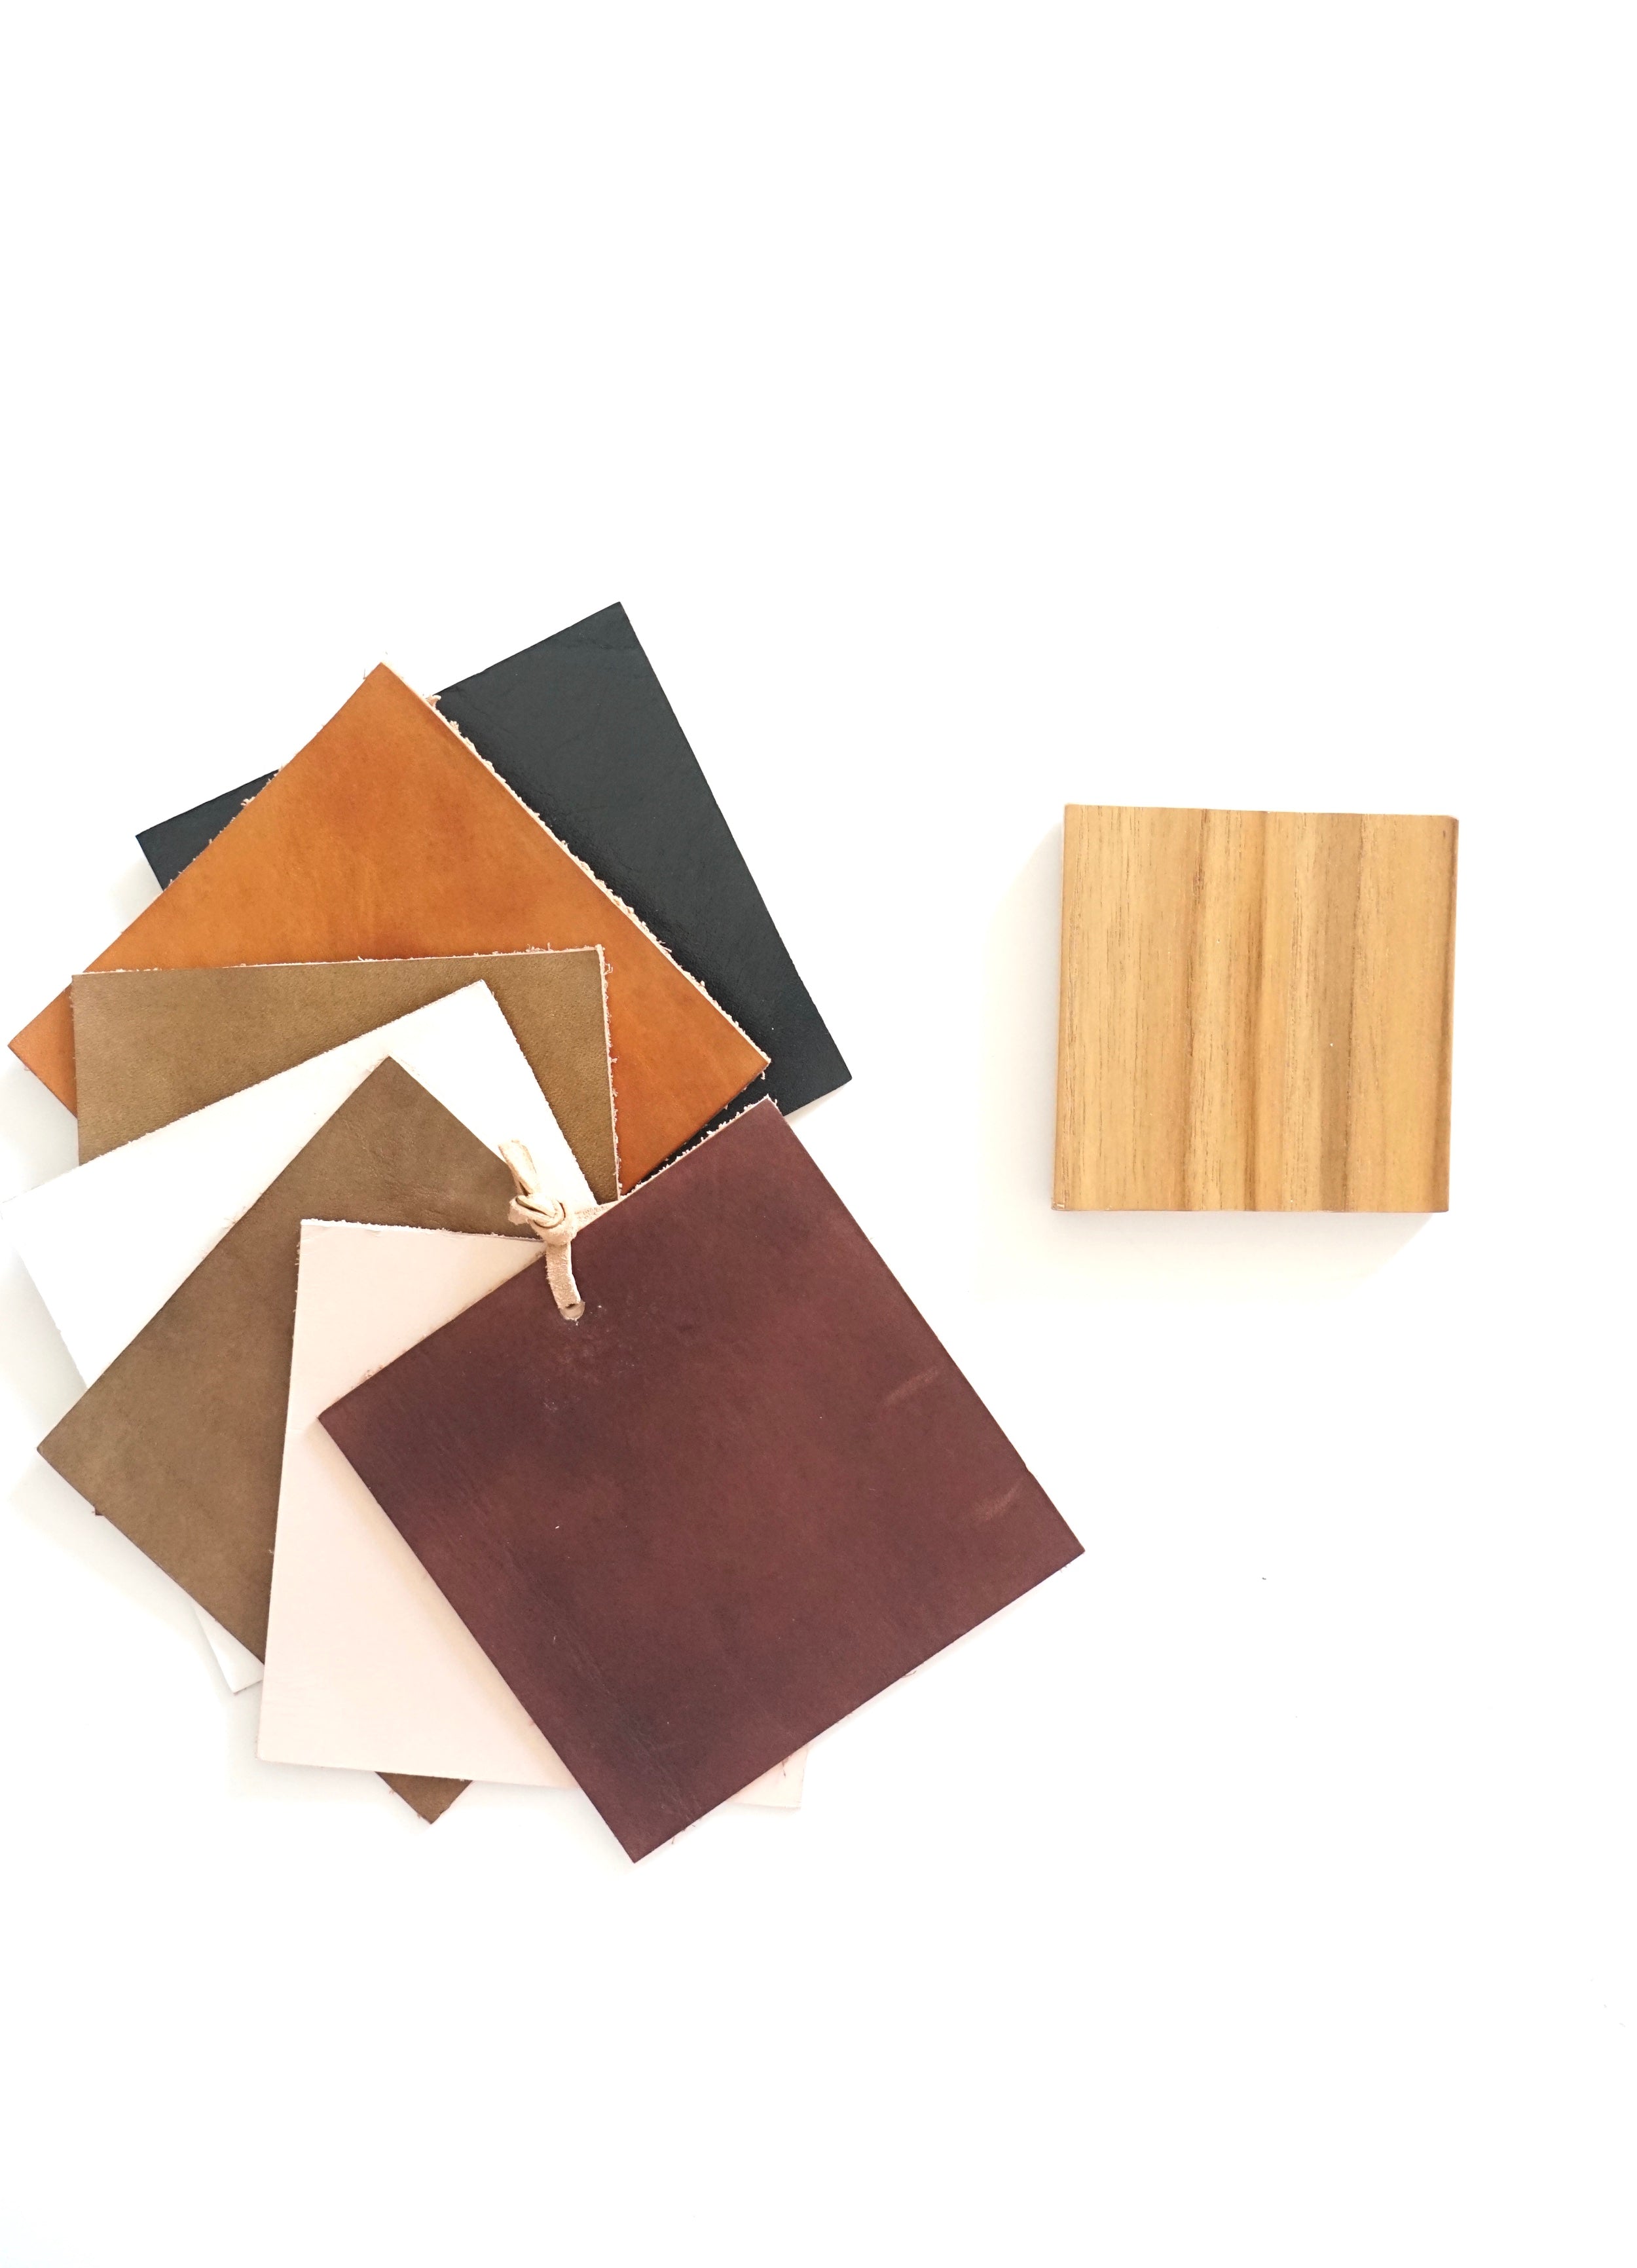 Leather + Wood Material Sample